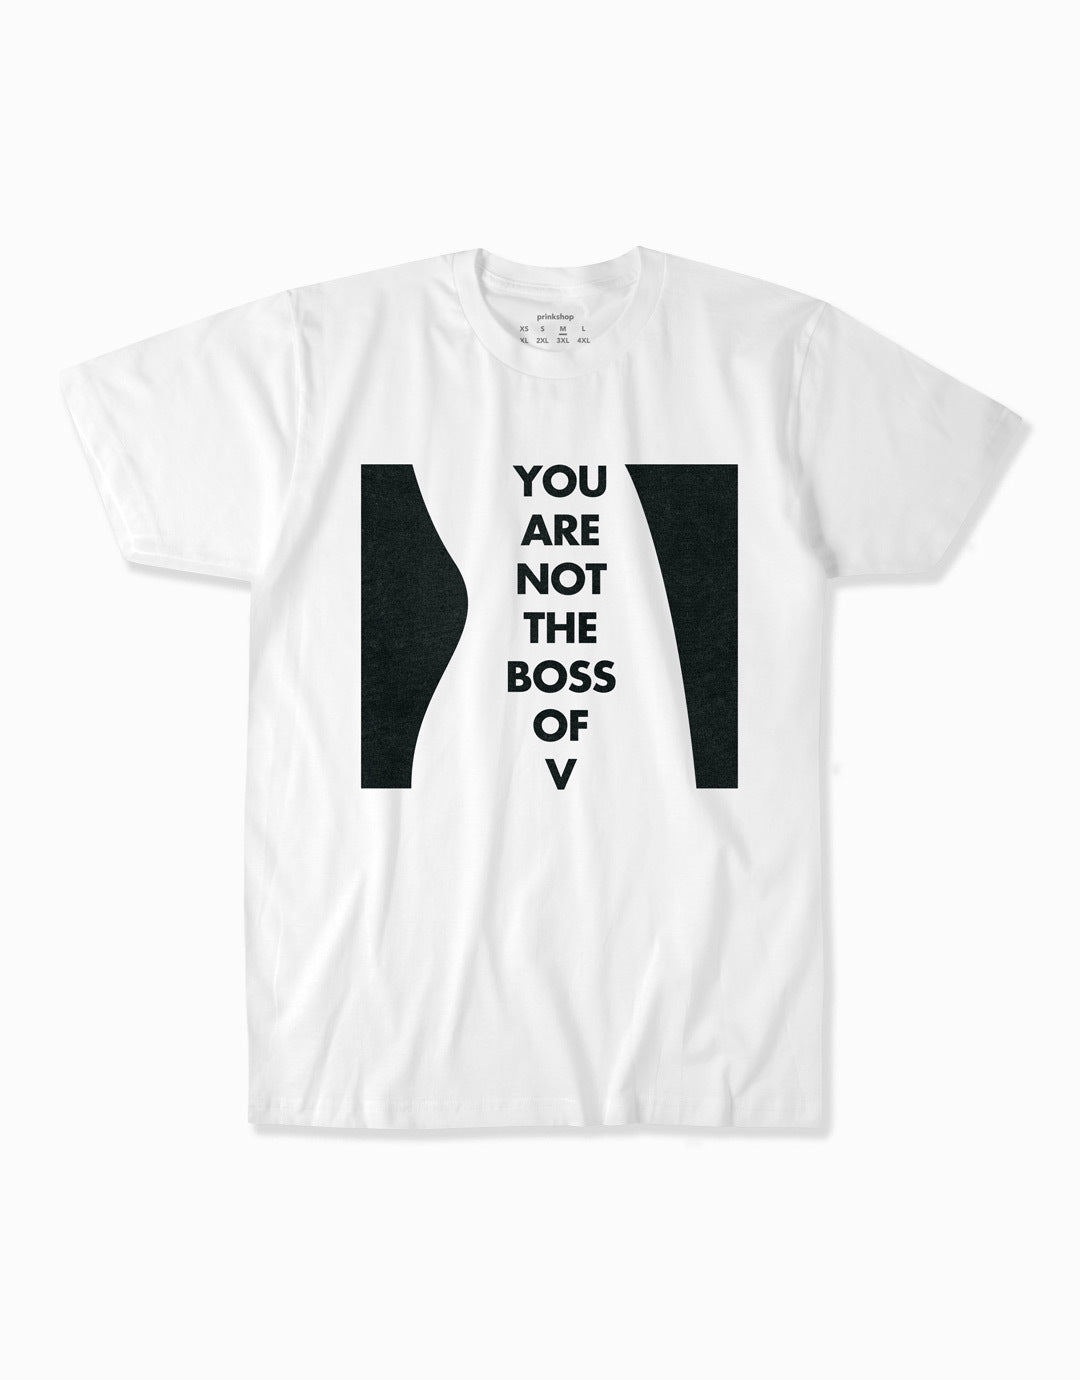 You are Not the Boss of V T-Shirt